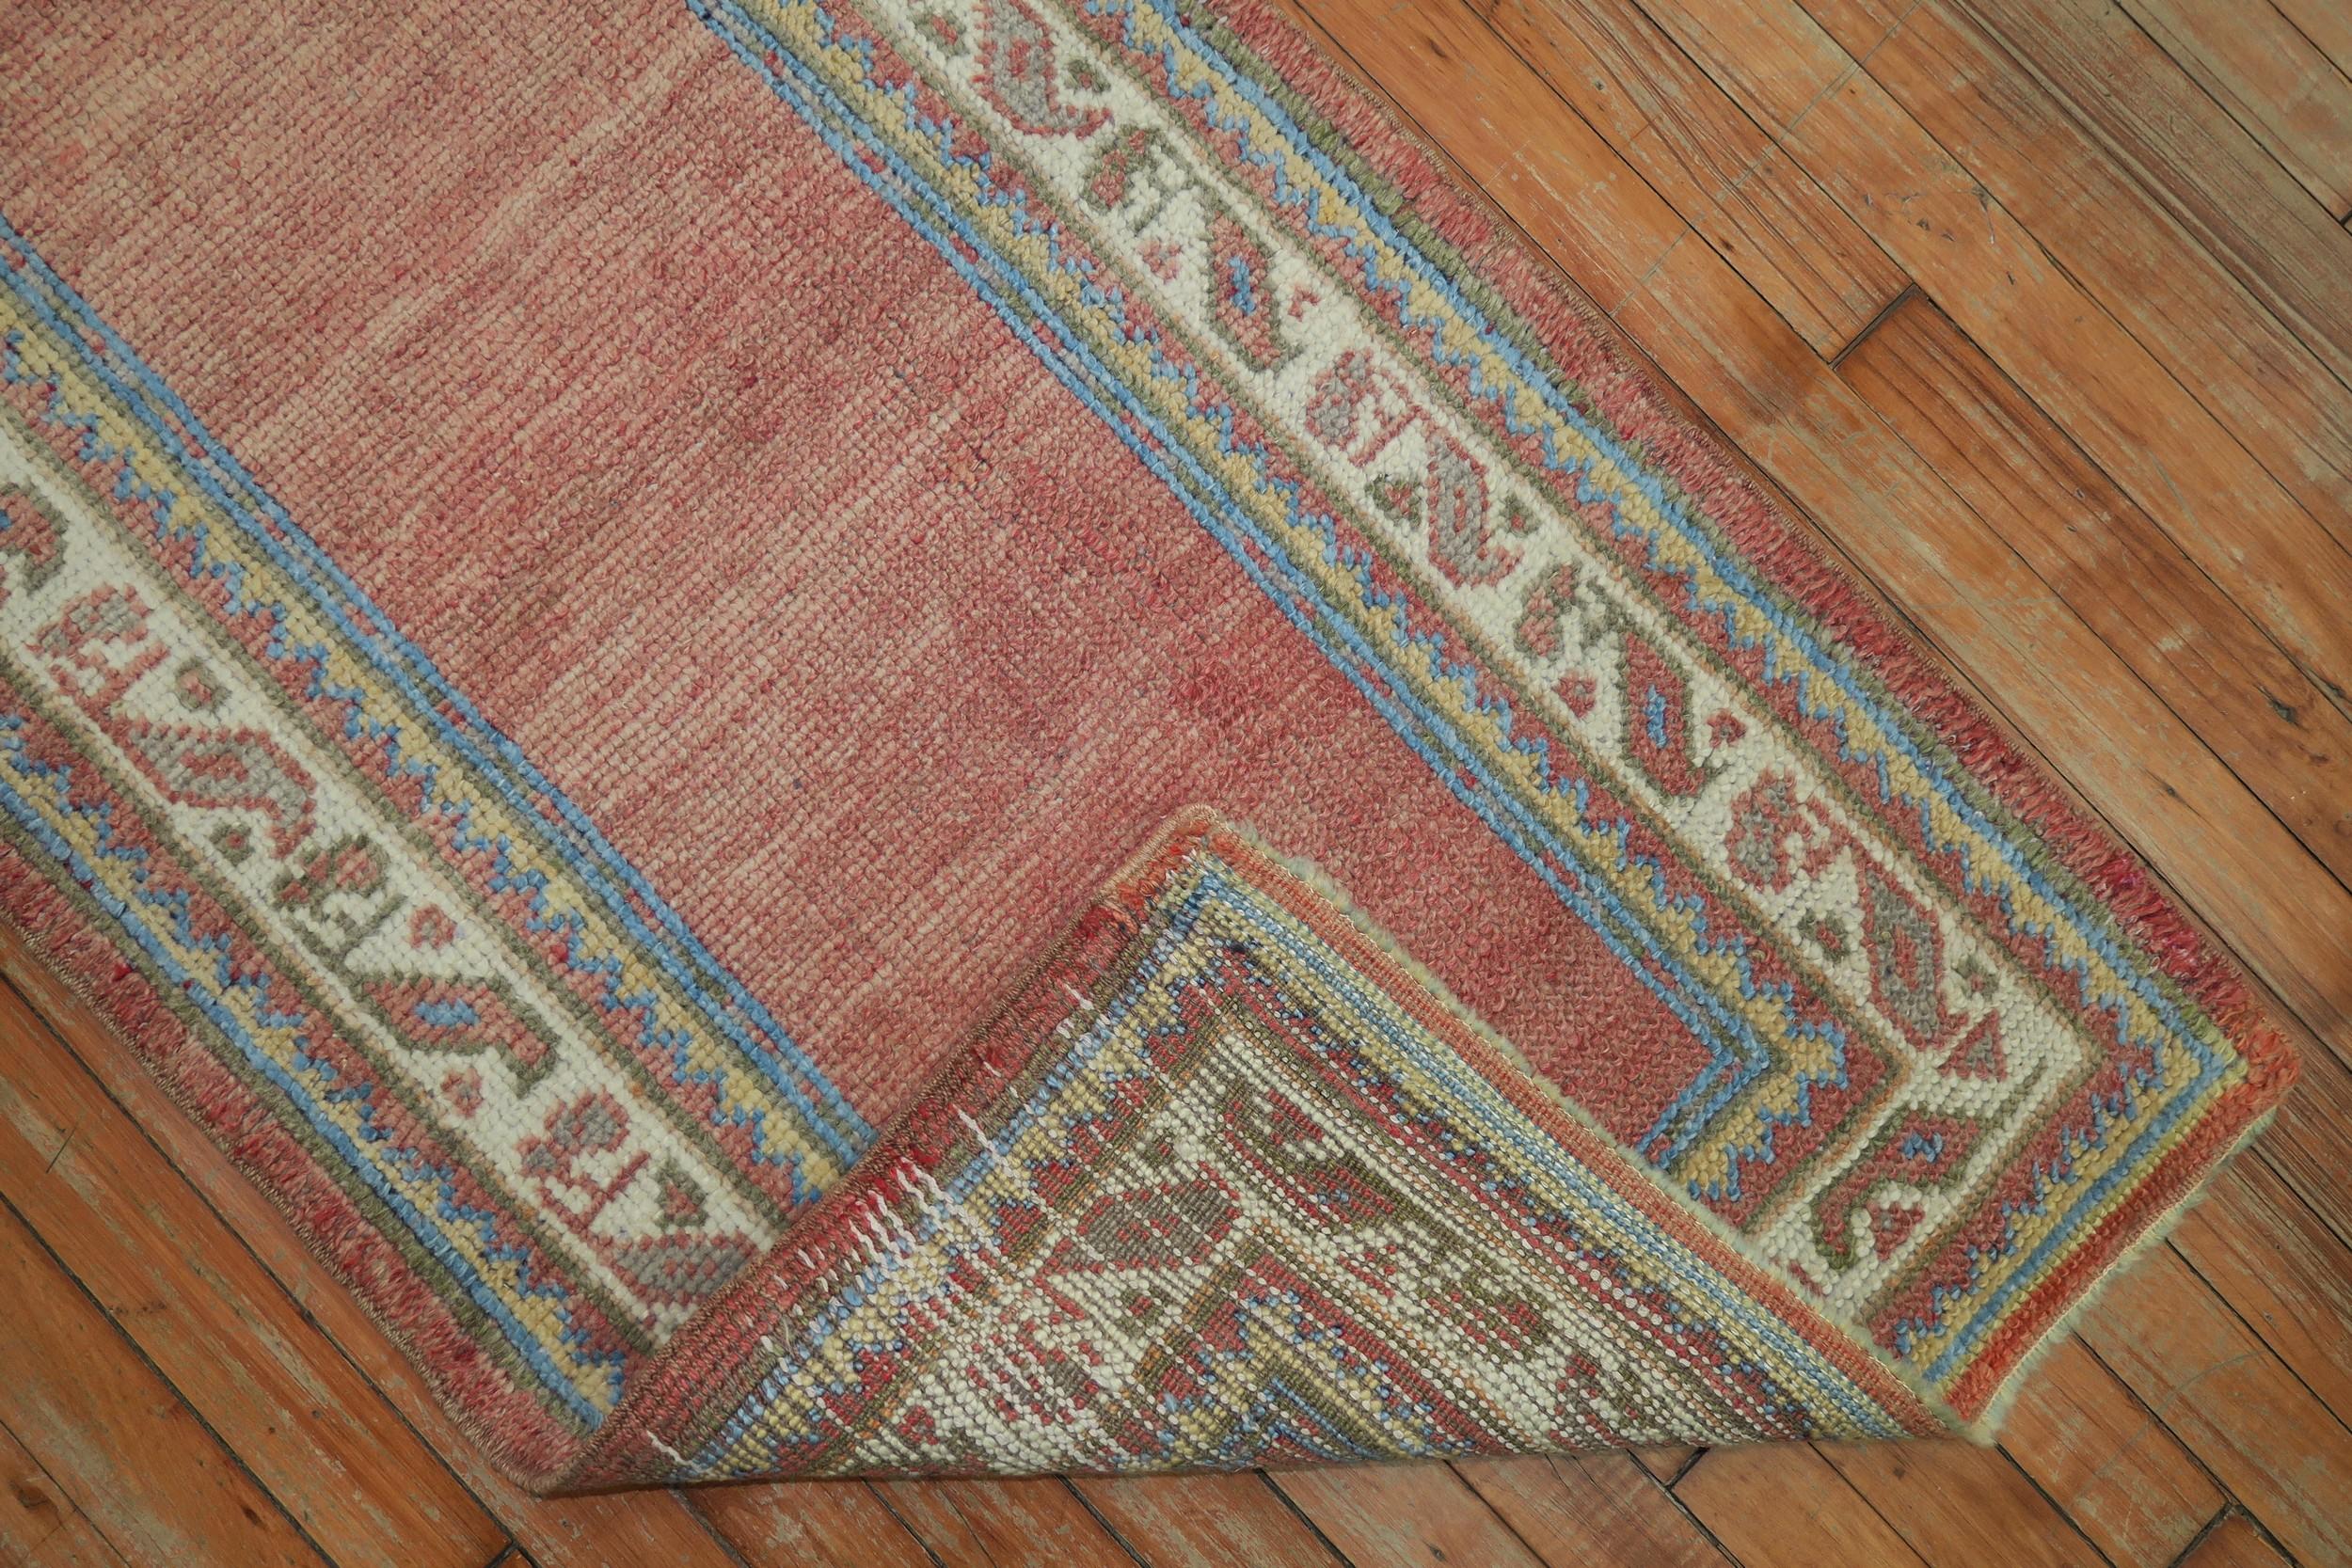 An antique Turkish Oushak runner. Plain solid soft red field, accents in ivory, robin eggs blue and beige.

Measures: 2'2